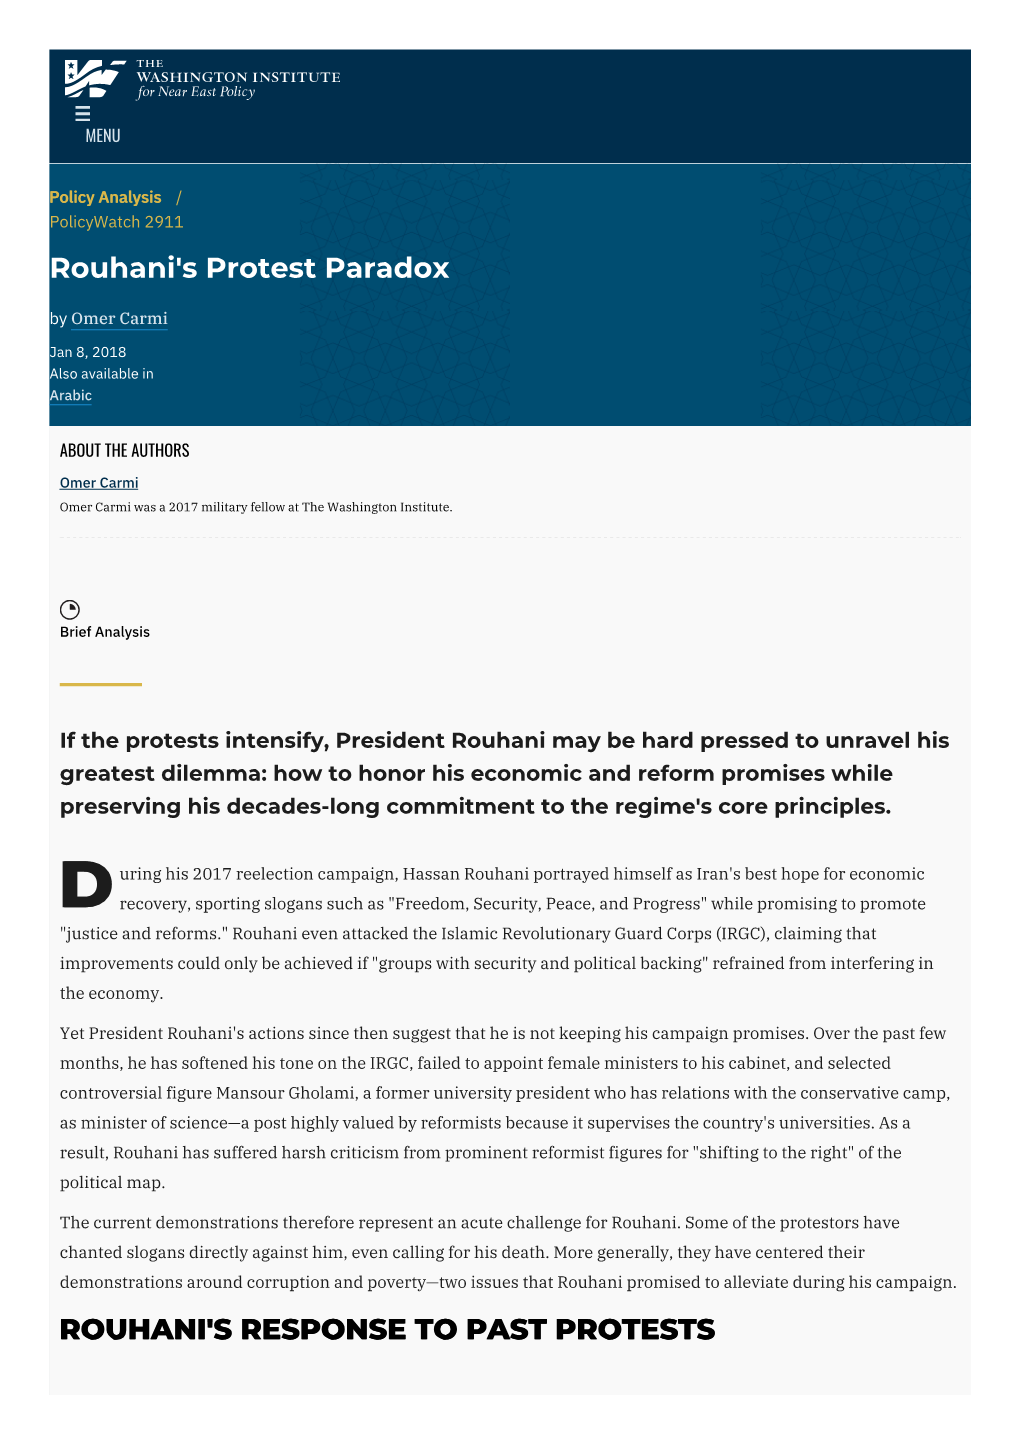 Rouhani's Protest Paradox | the Washington Institute